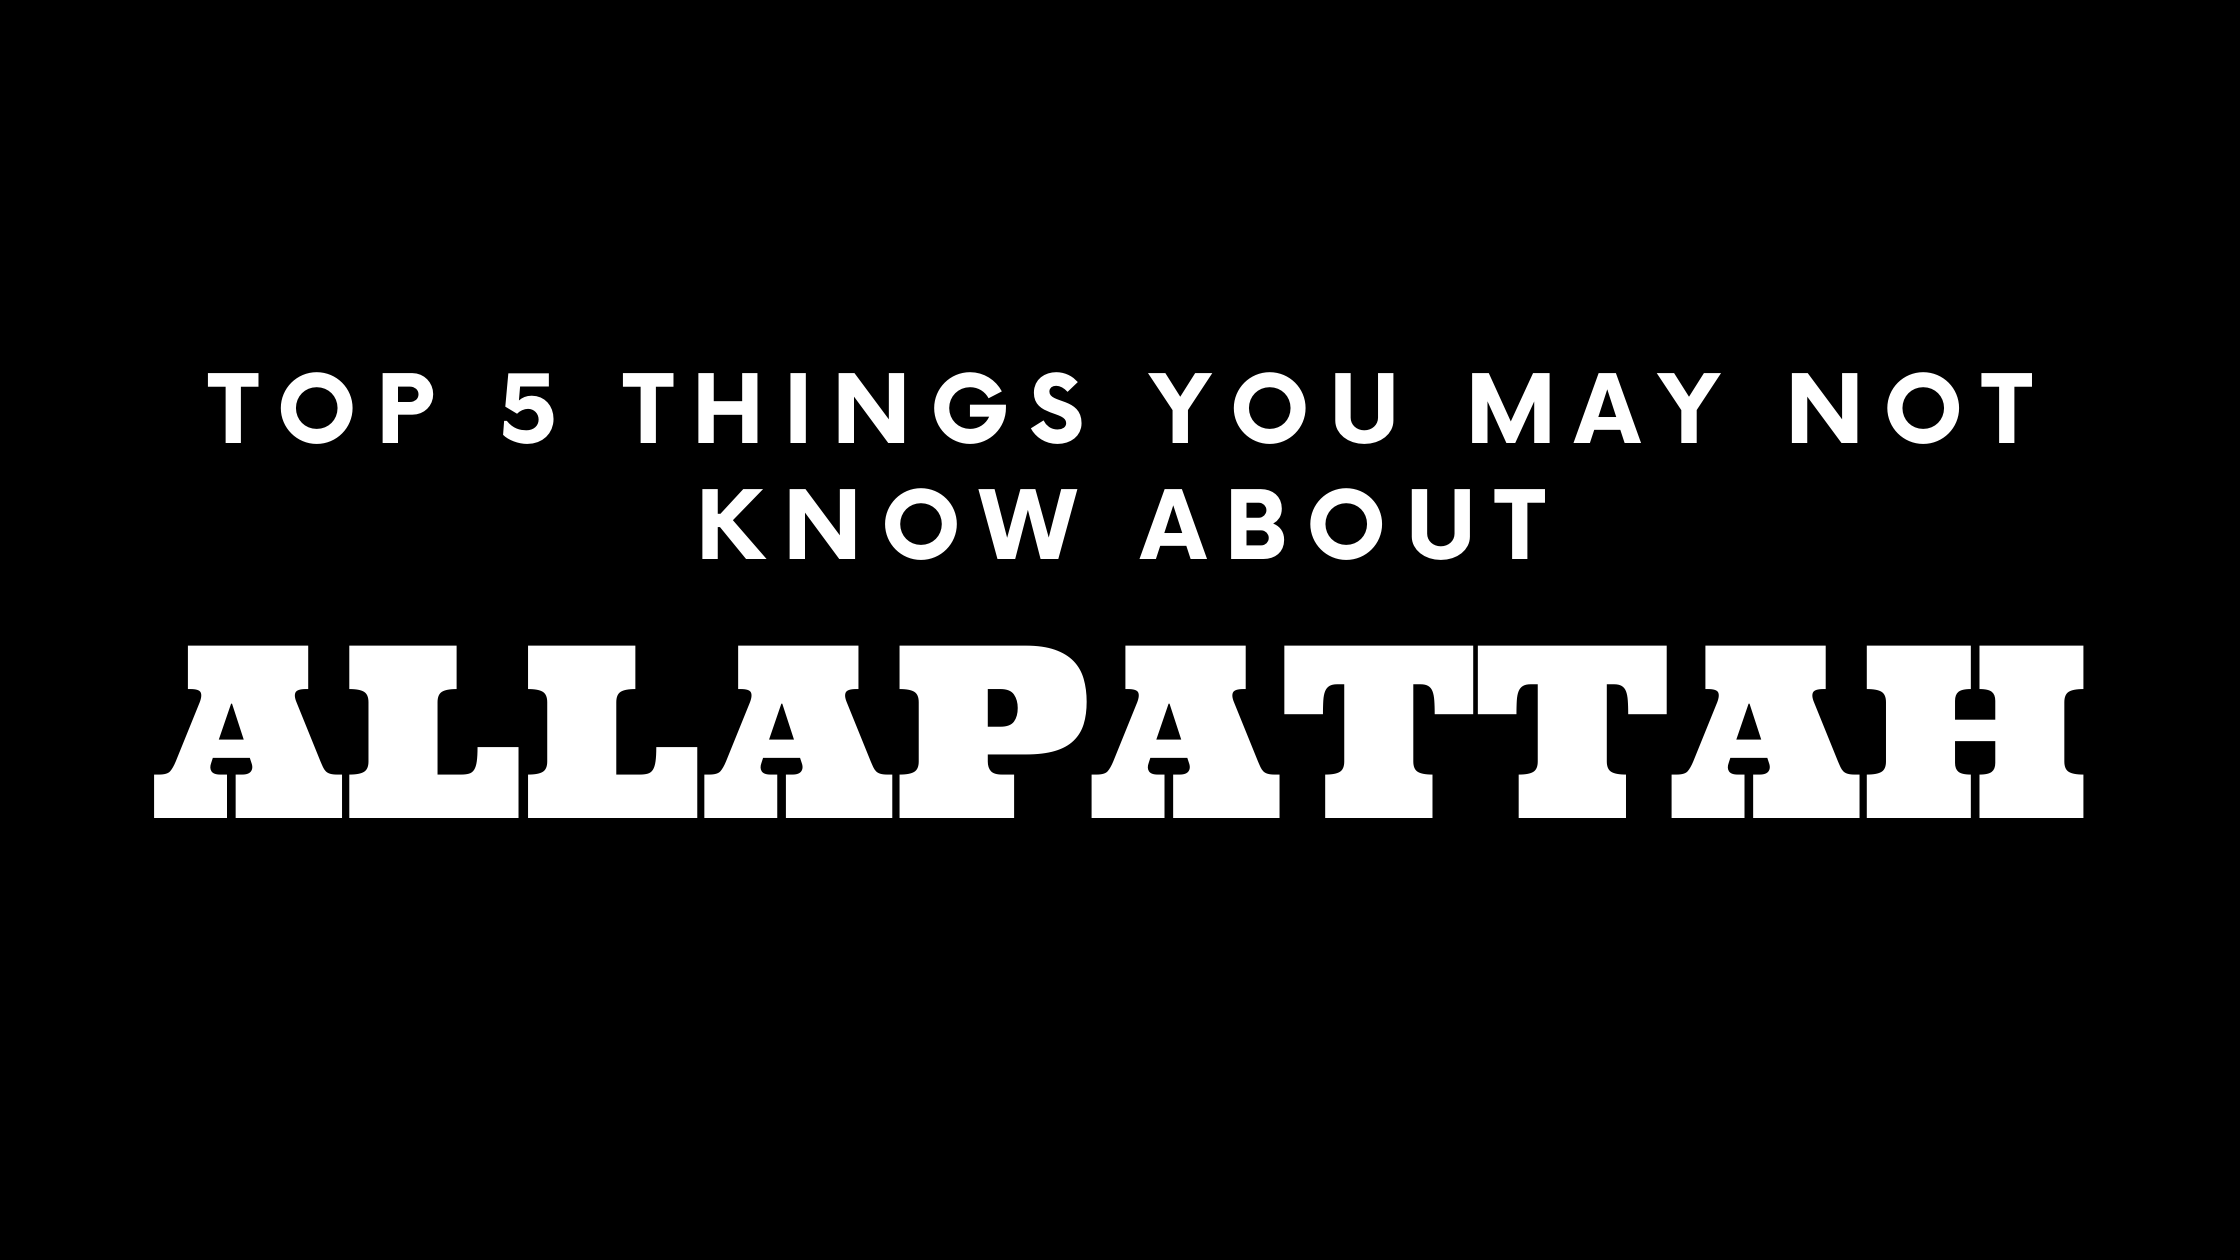 Top 5 Things You May Not Know About Allapattah